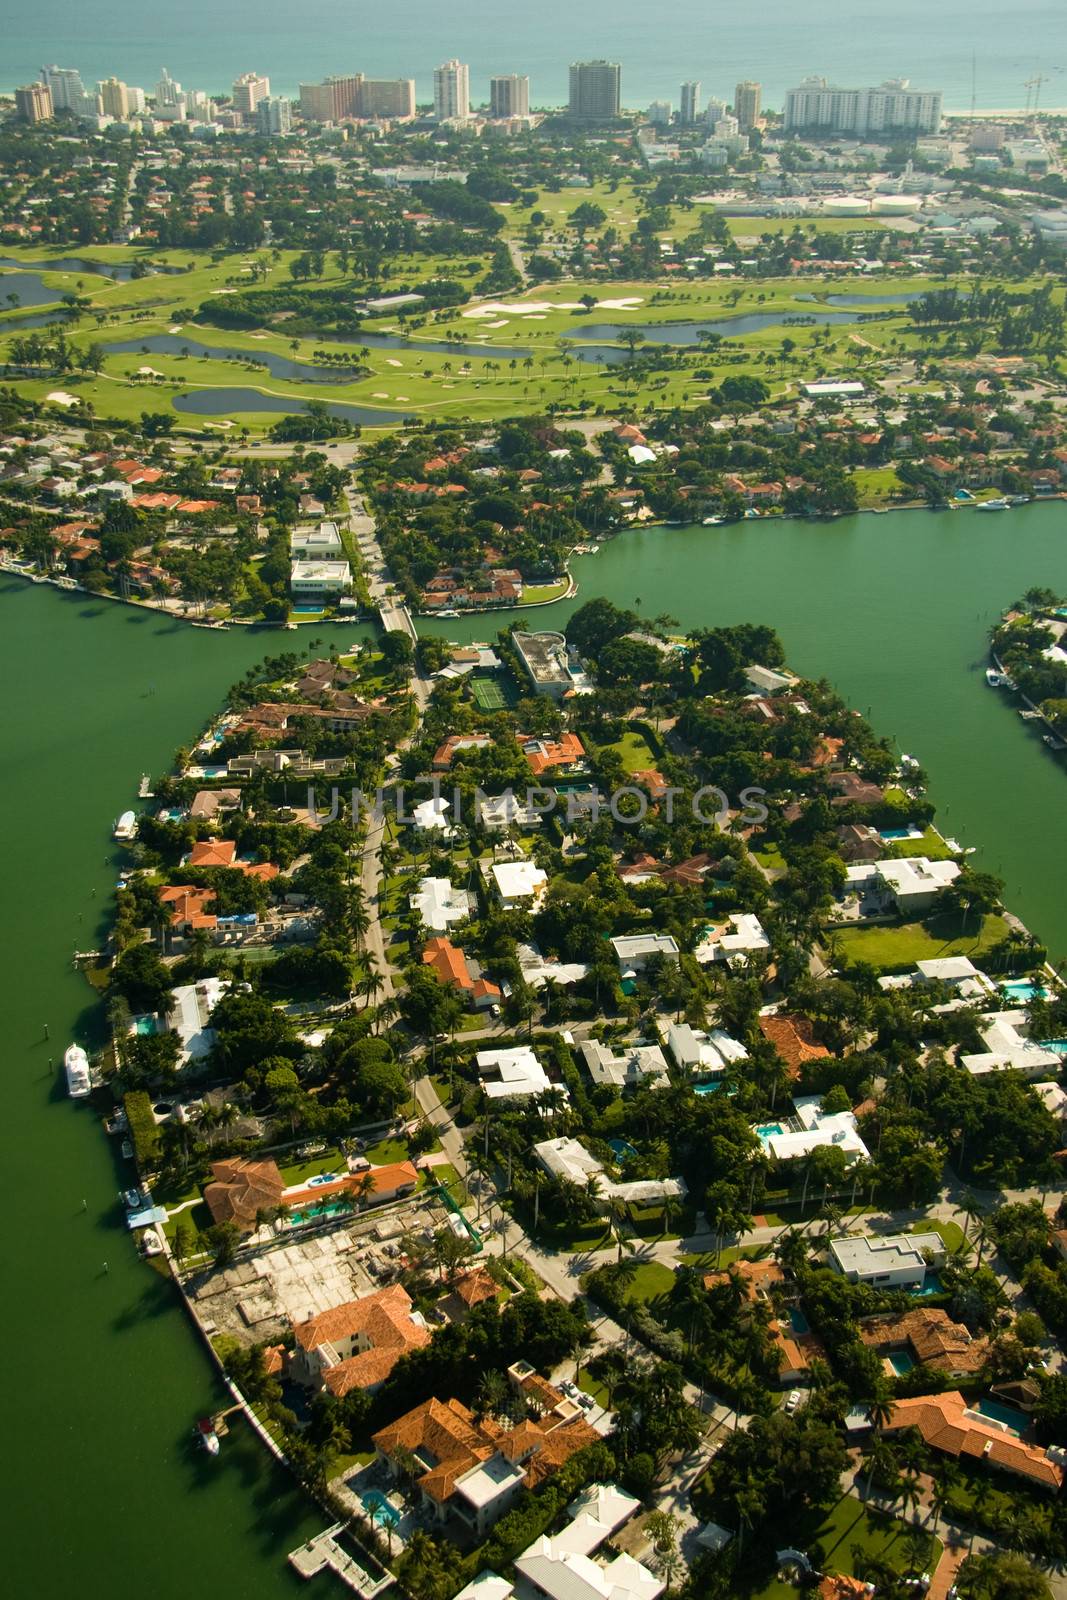 An aerial view of generic residential area in Miami, Florida.